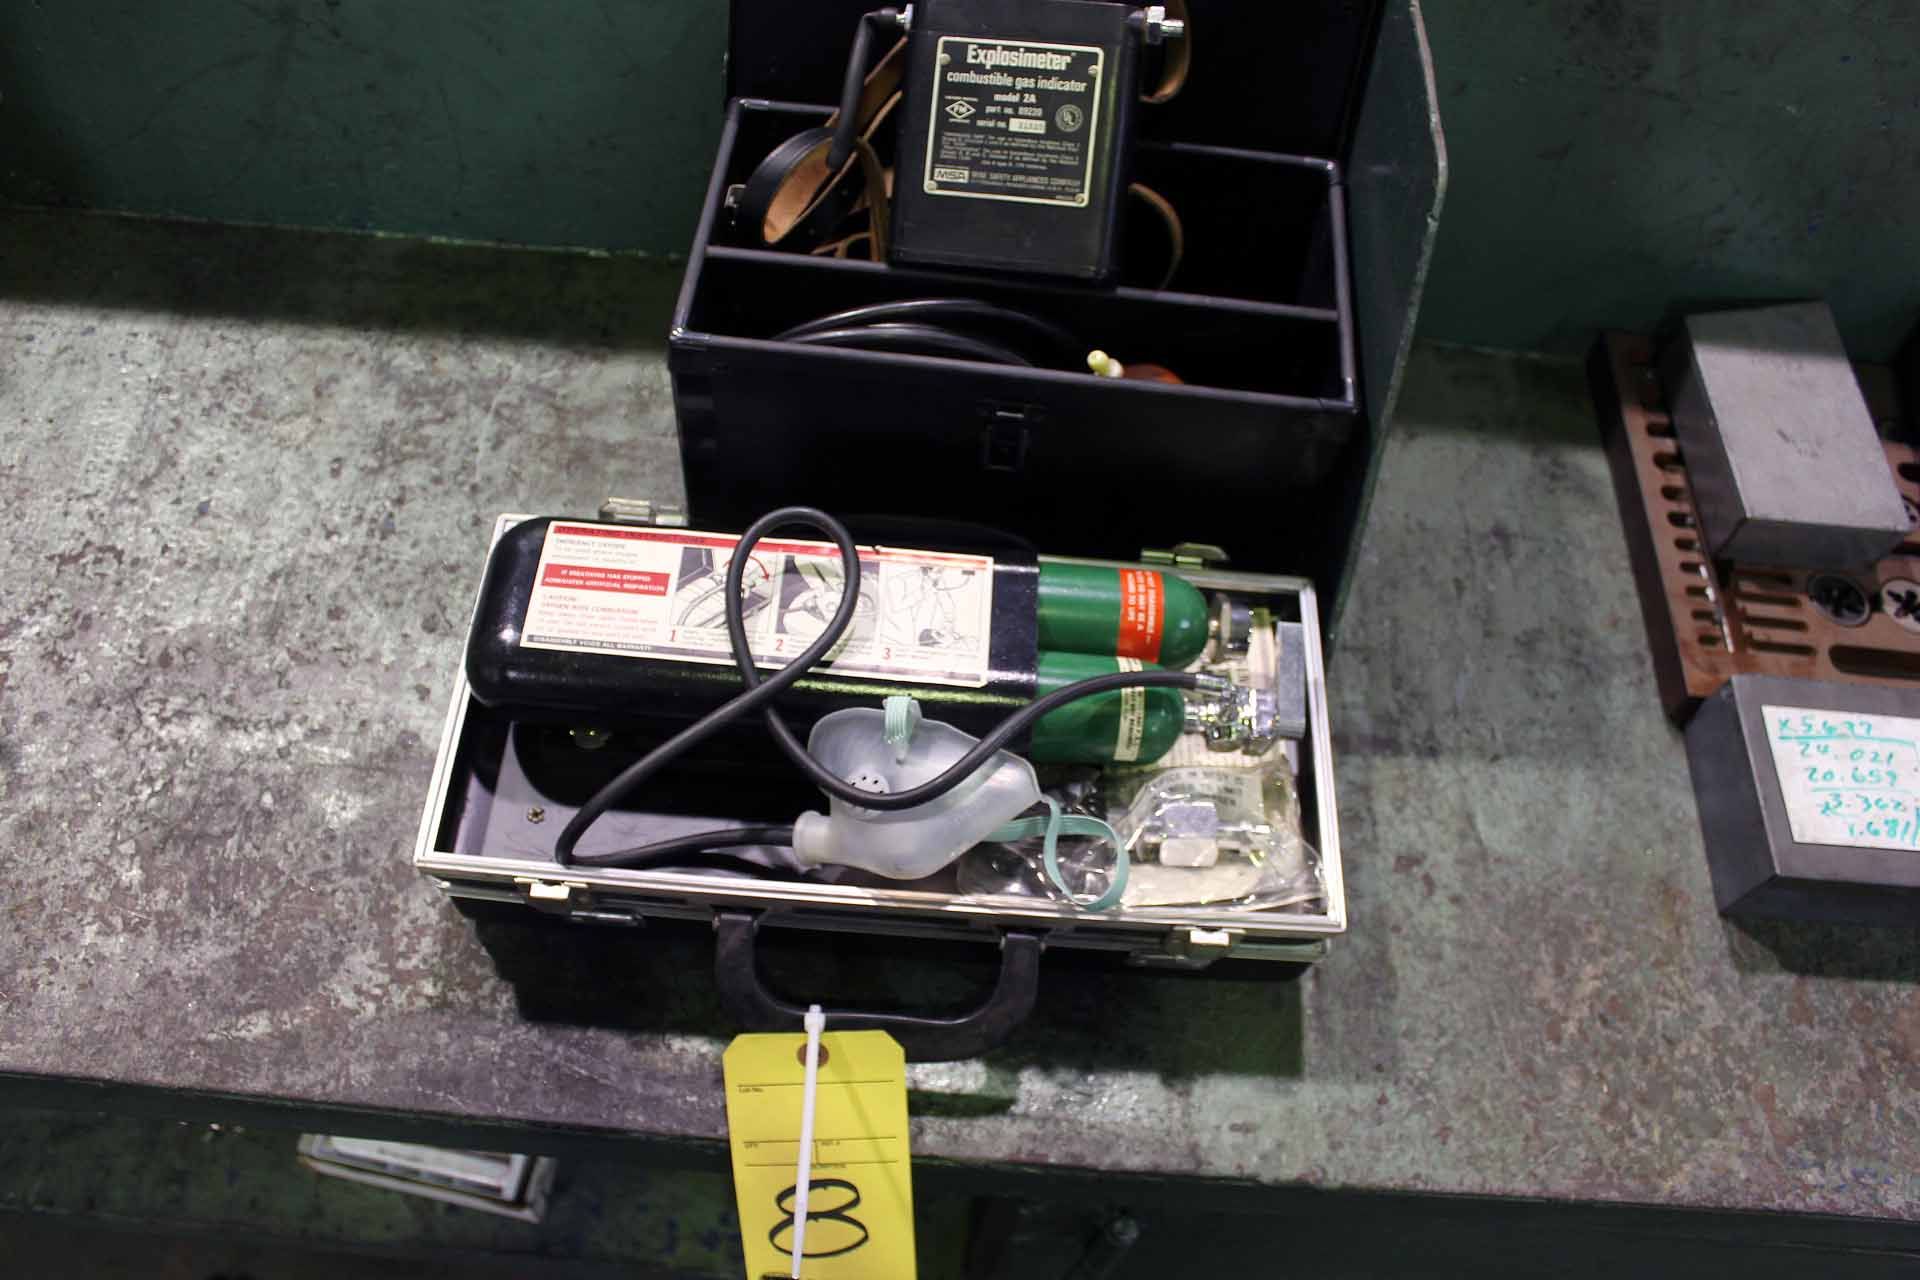 LOT CONSISTING OF: emergency oxygen kit & Explosimeter Mdl. 2A combustible gas indicator